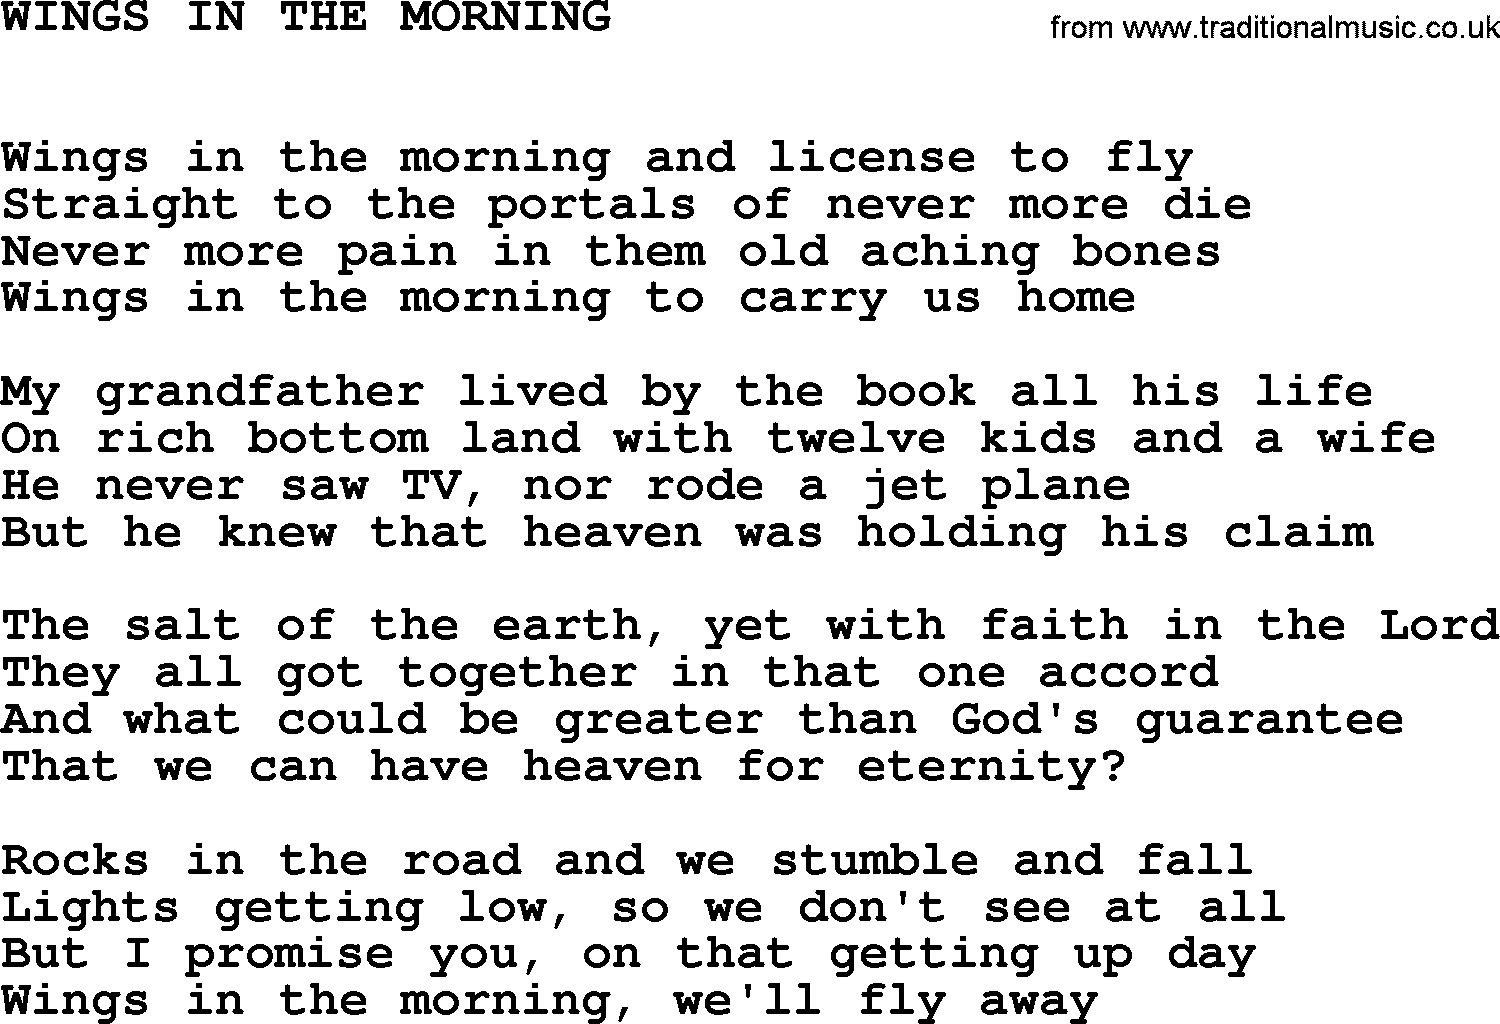 Johnny Cash song Wings In The Morning.txt lyrics